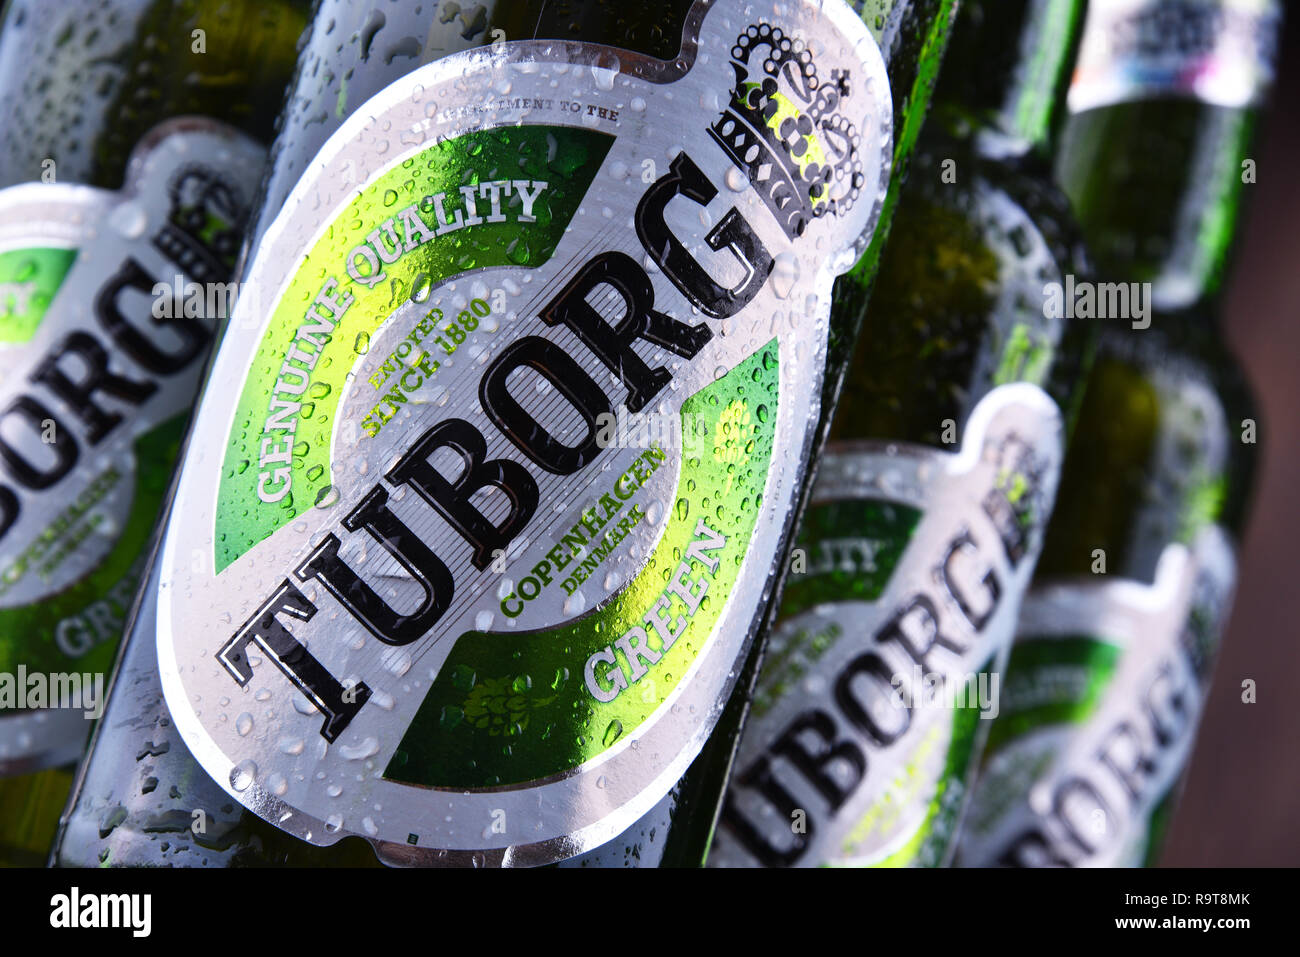 POZNAN, POL - JUN 8, 2018: Bottles of Tuborg beer, produced by a Danish brewing company founded in 1873 near Copenhagen Stock Photo